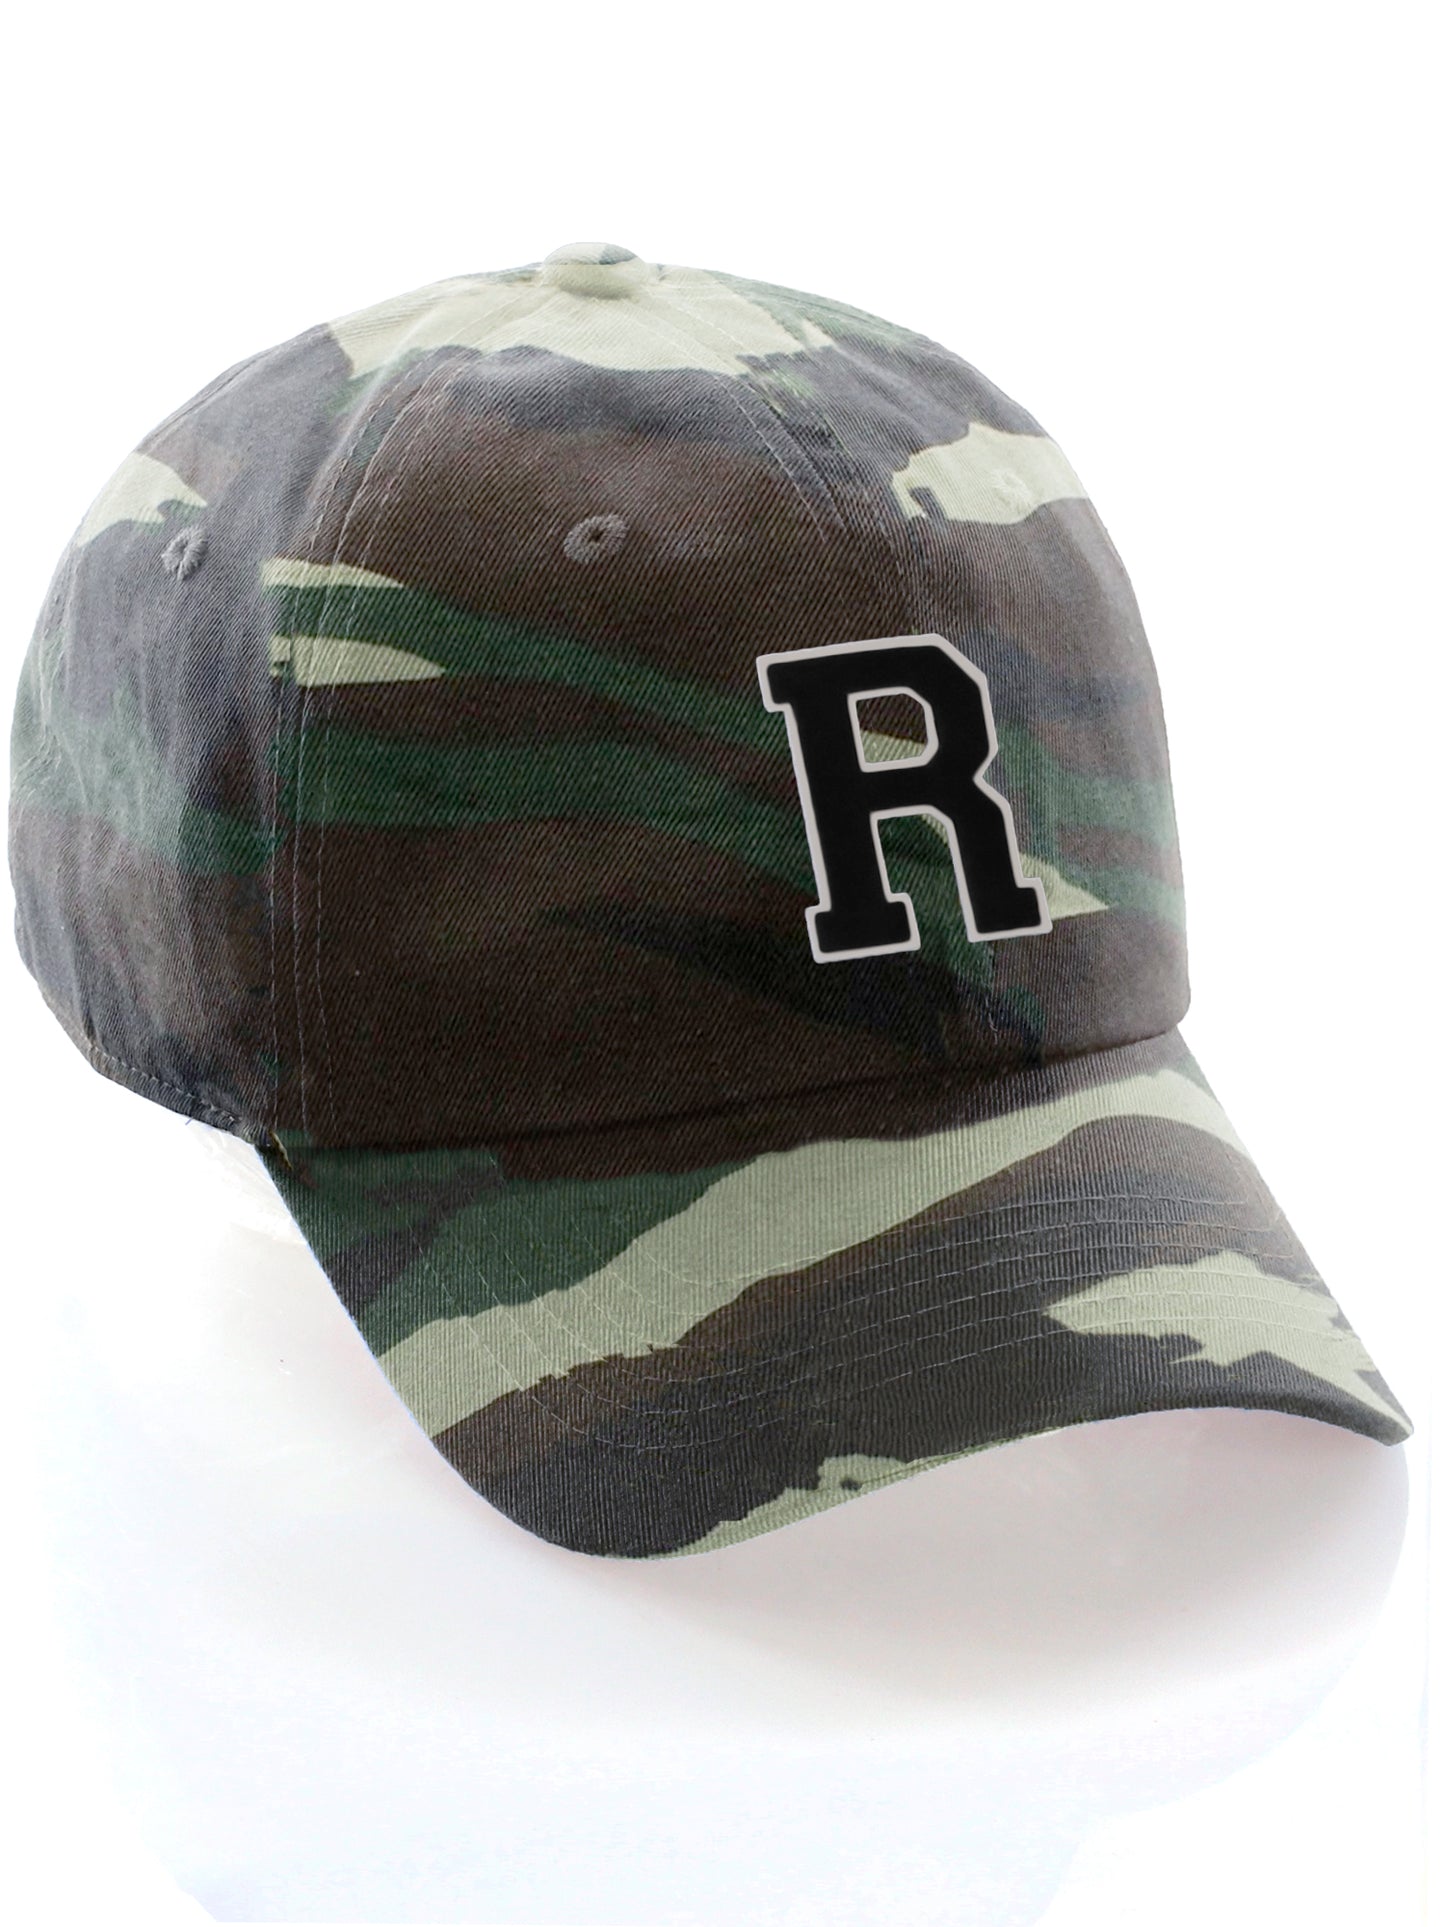 I&W Hatgear Customized Letter Initial Baseball Hat A to Z Team Colors, Camo Cap White Black